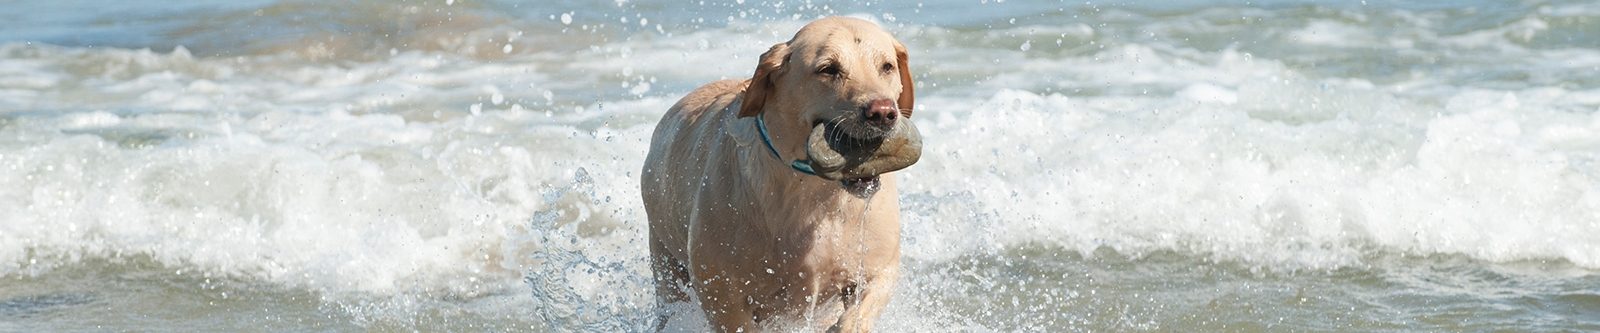 dog in surf carrying stone